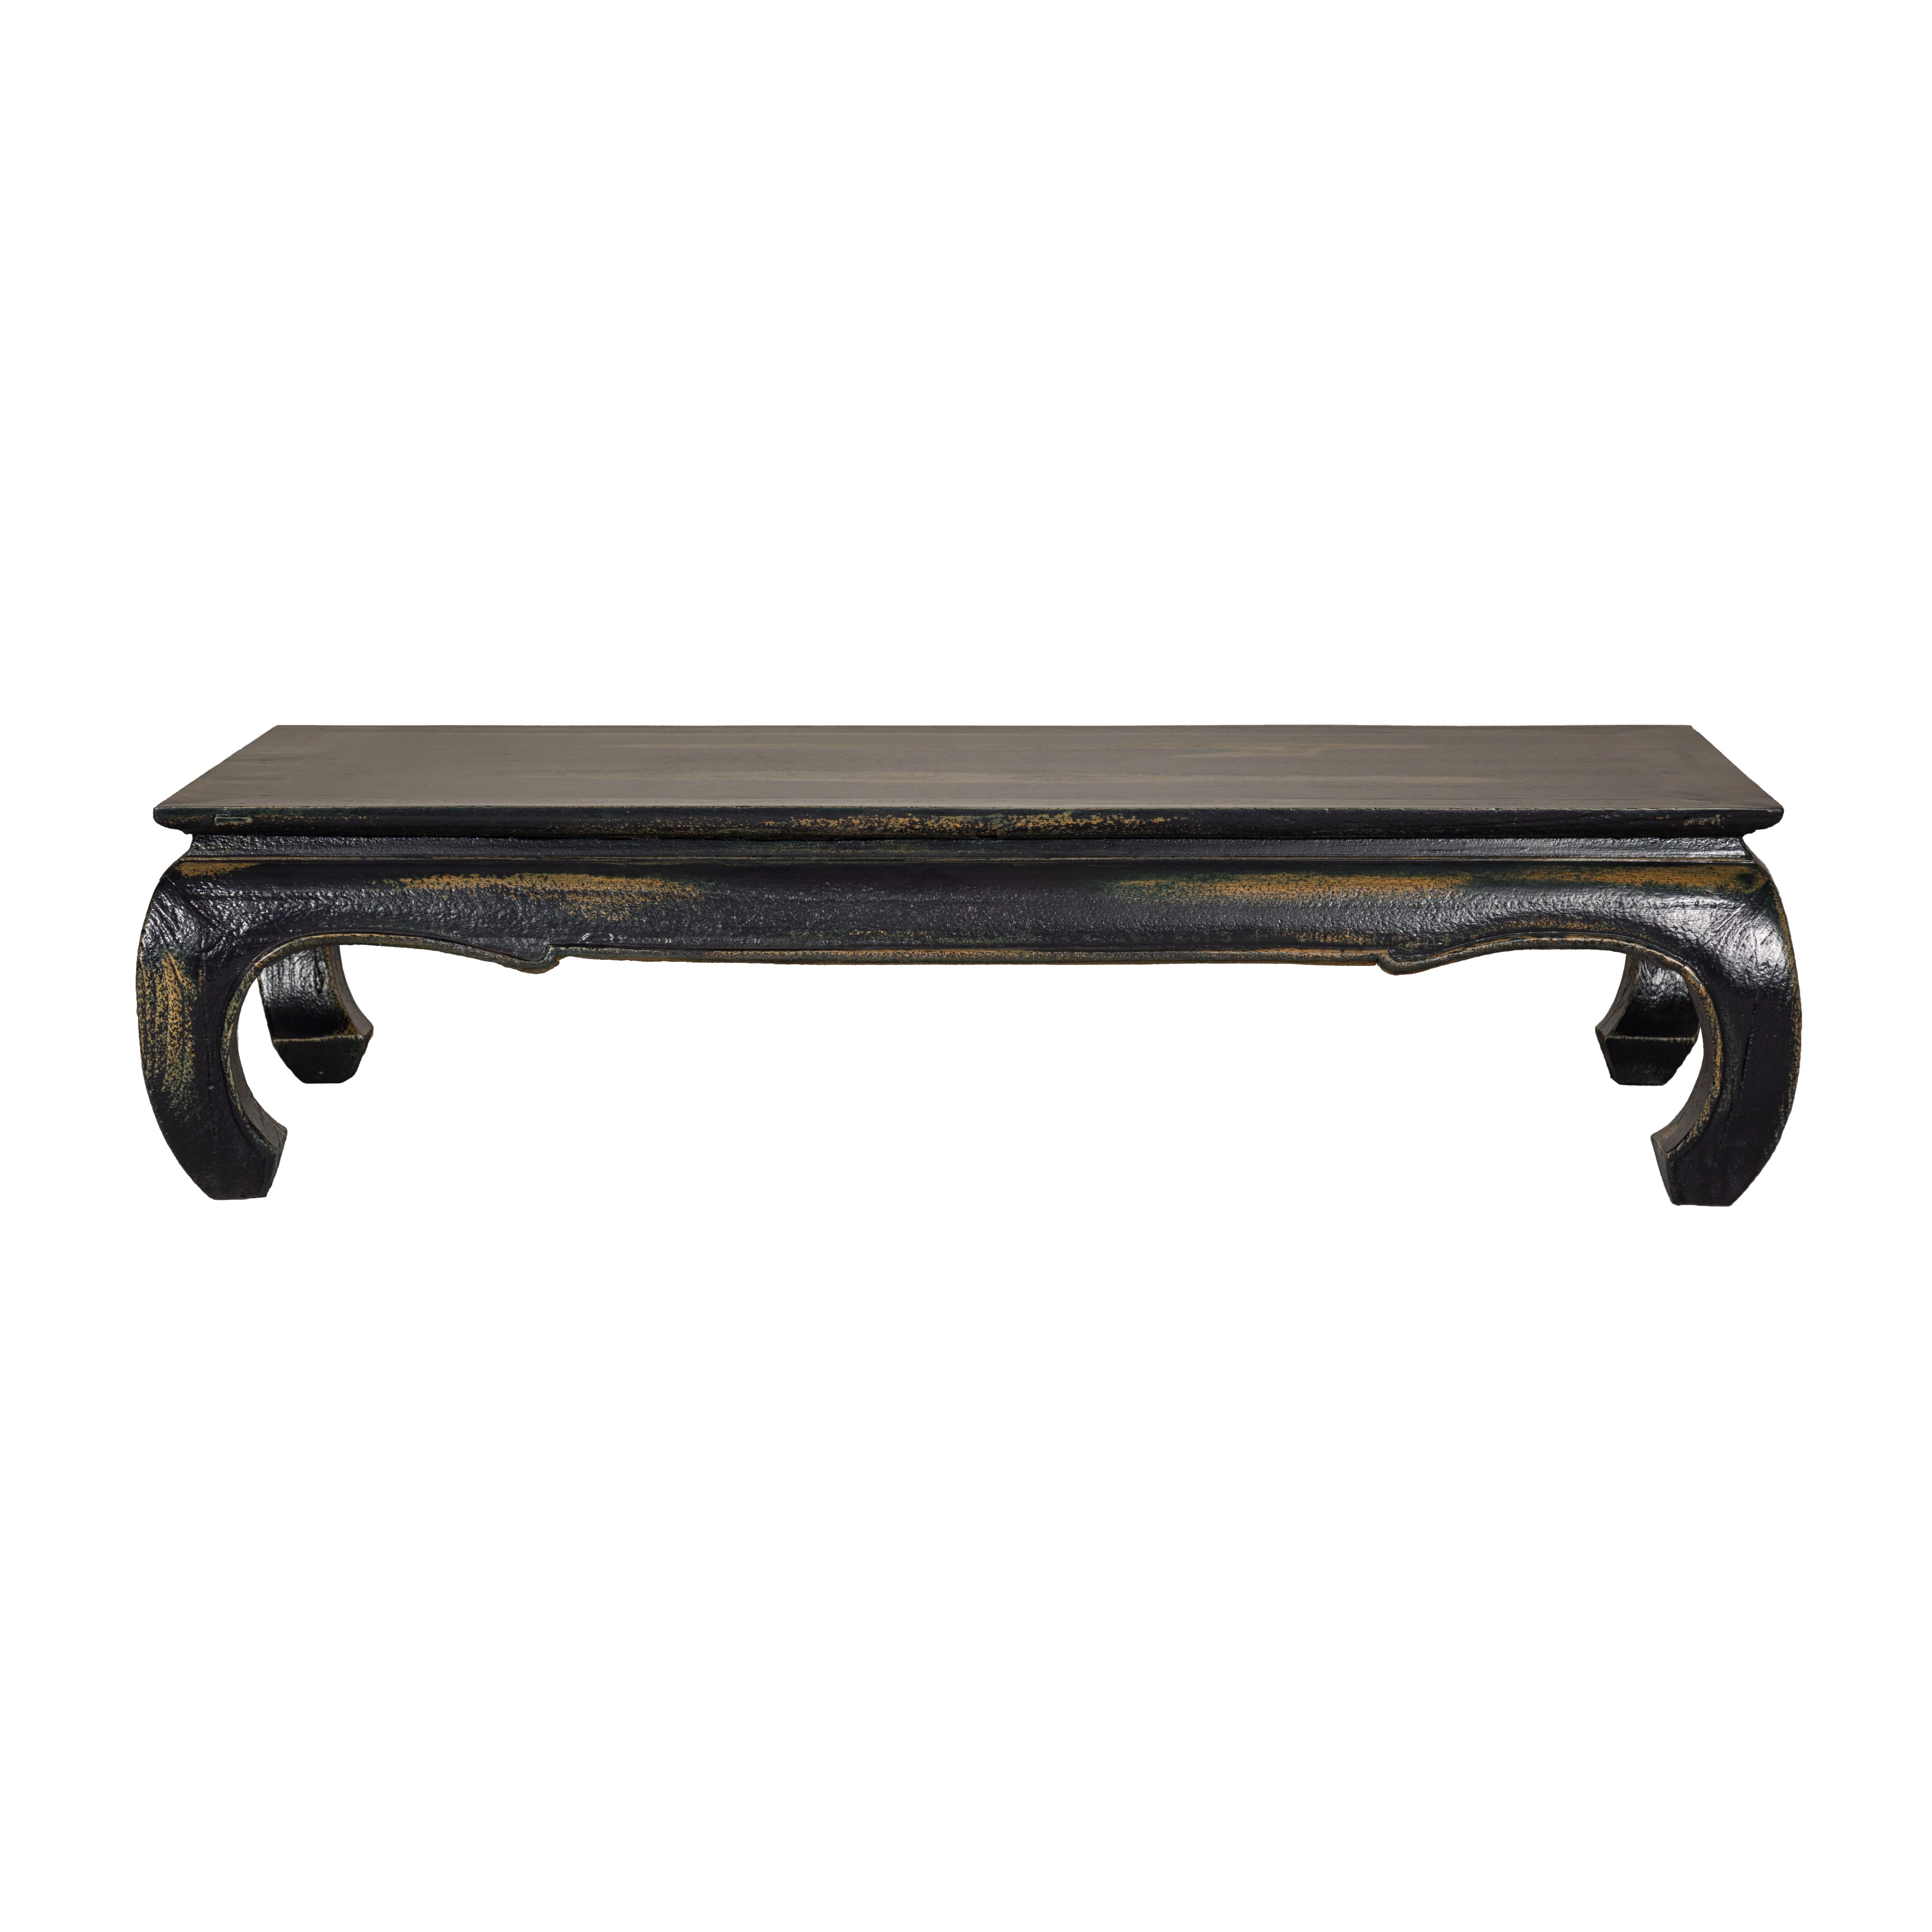 Distressed Dark Blue Chow Leg Coffee Table with Ocher Accents and Waisted Apron For Sale 10